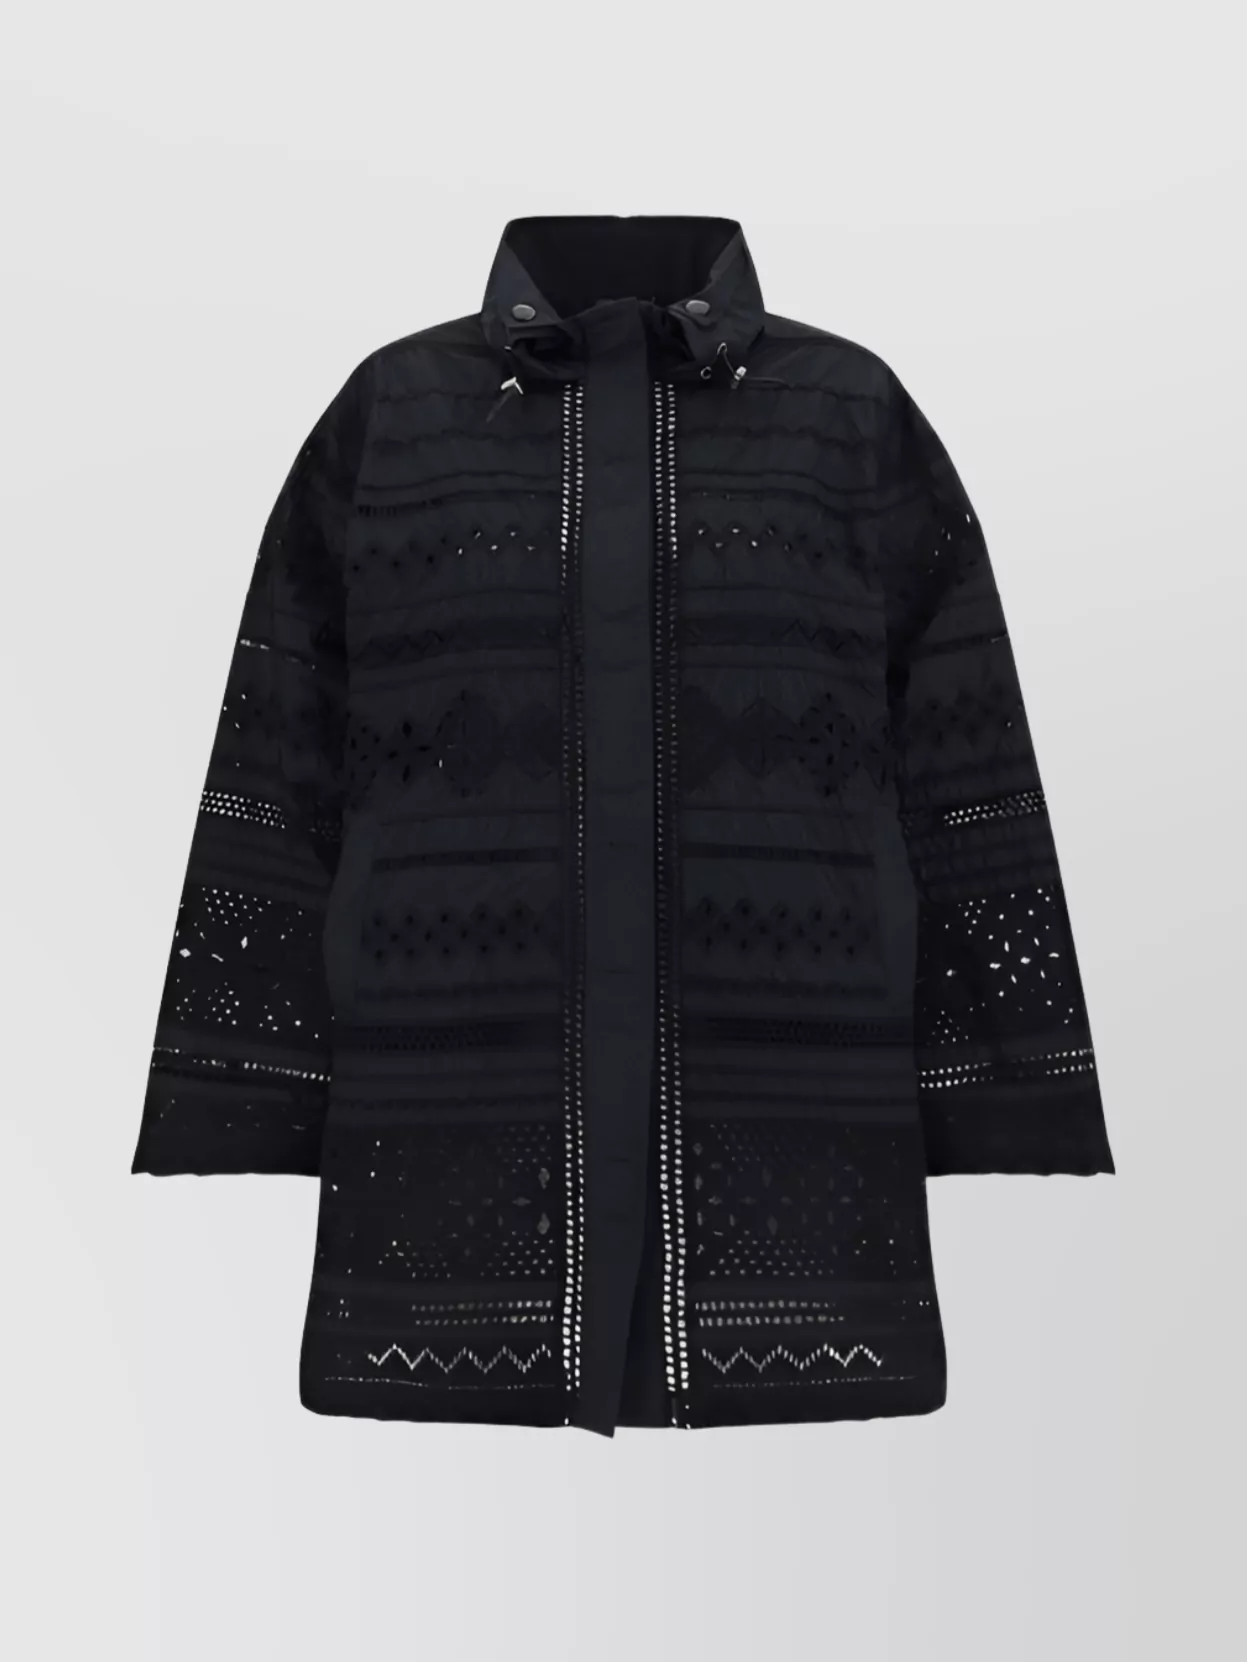 Ermanno Scervino Graphic Cut-out Hooded Quilted Jacket In Black